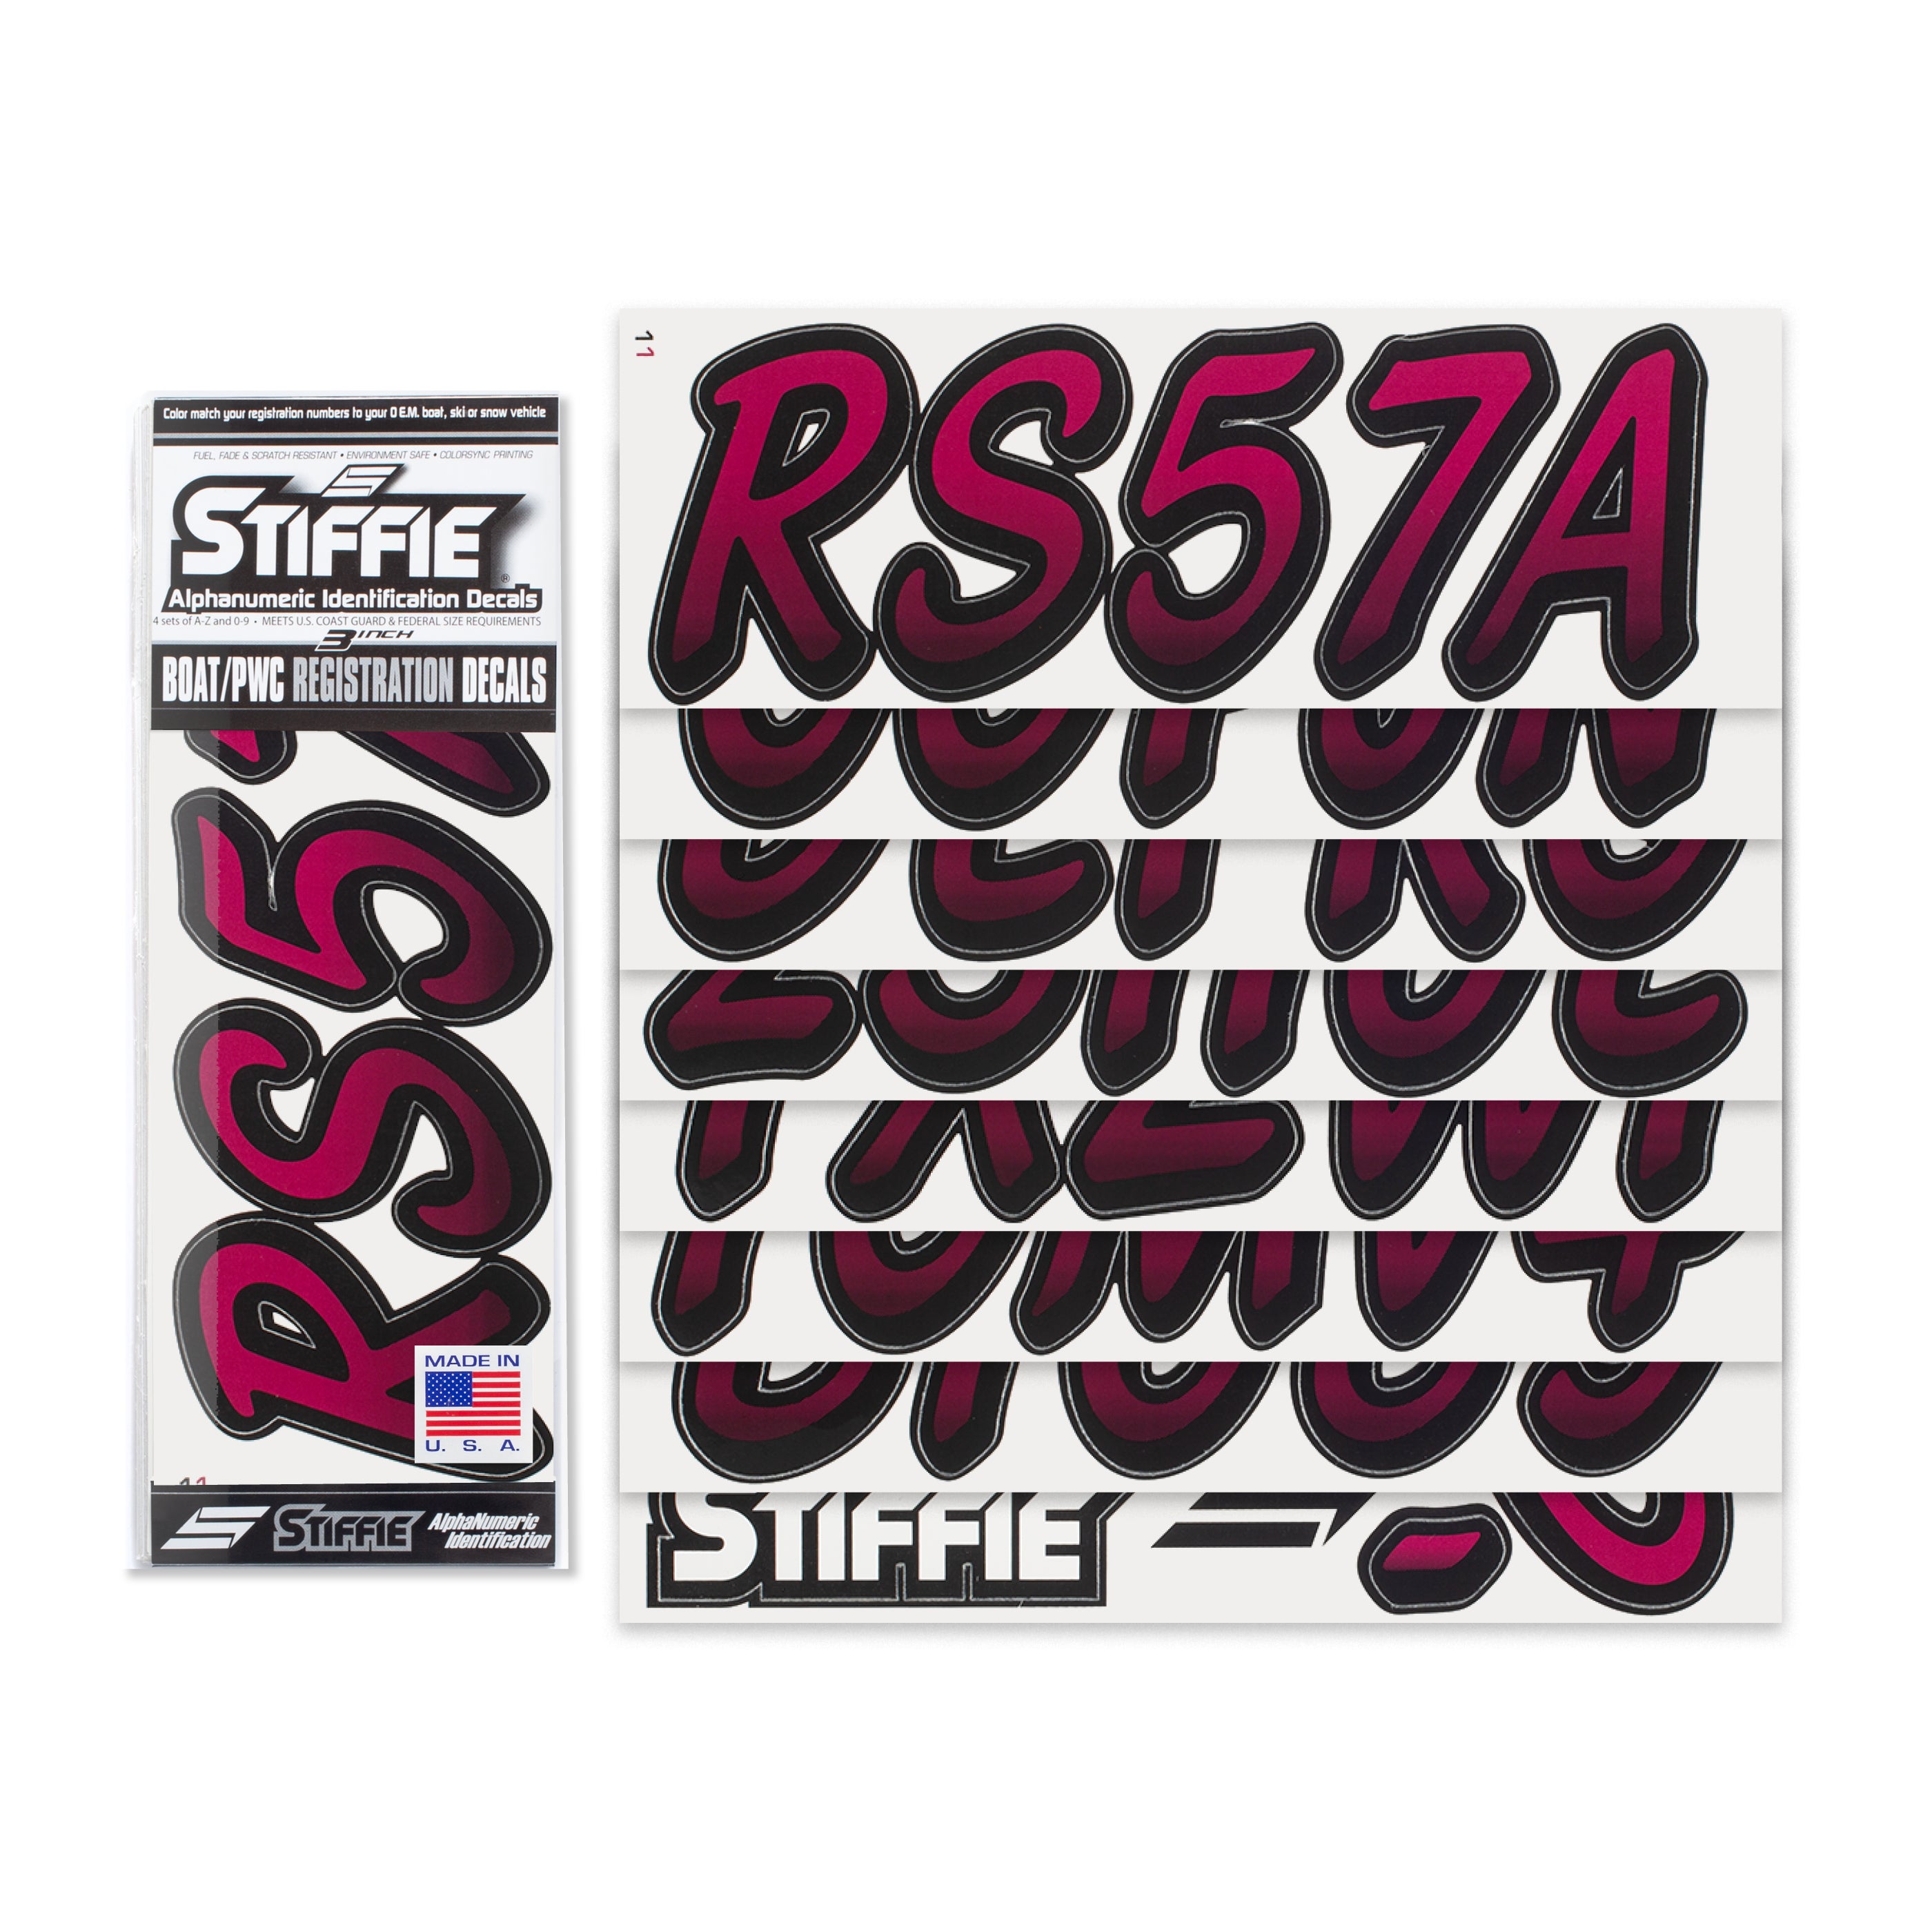 Stiffie Whipline Wine/Black 3" Alpha-Numeric Registration Identification Numbers Stickers Decals for Boats & Personal Watercraft